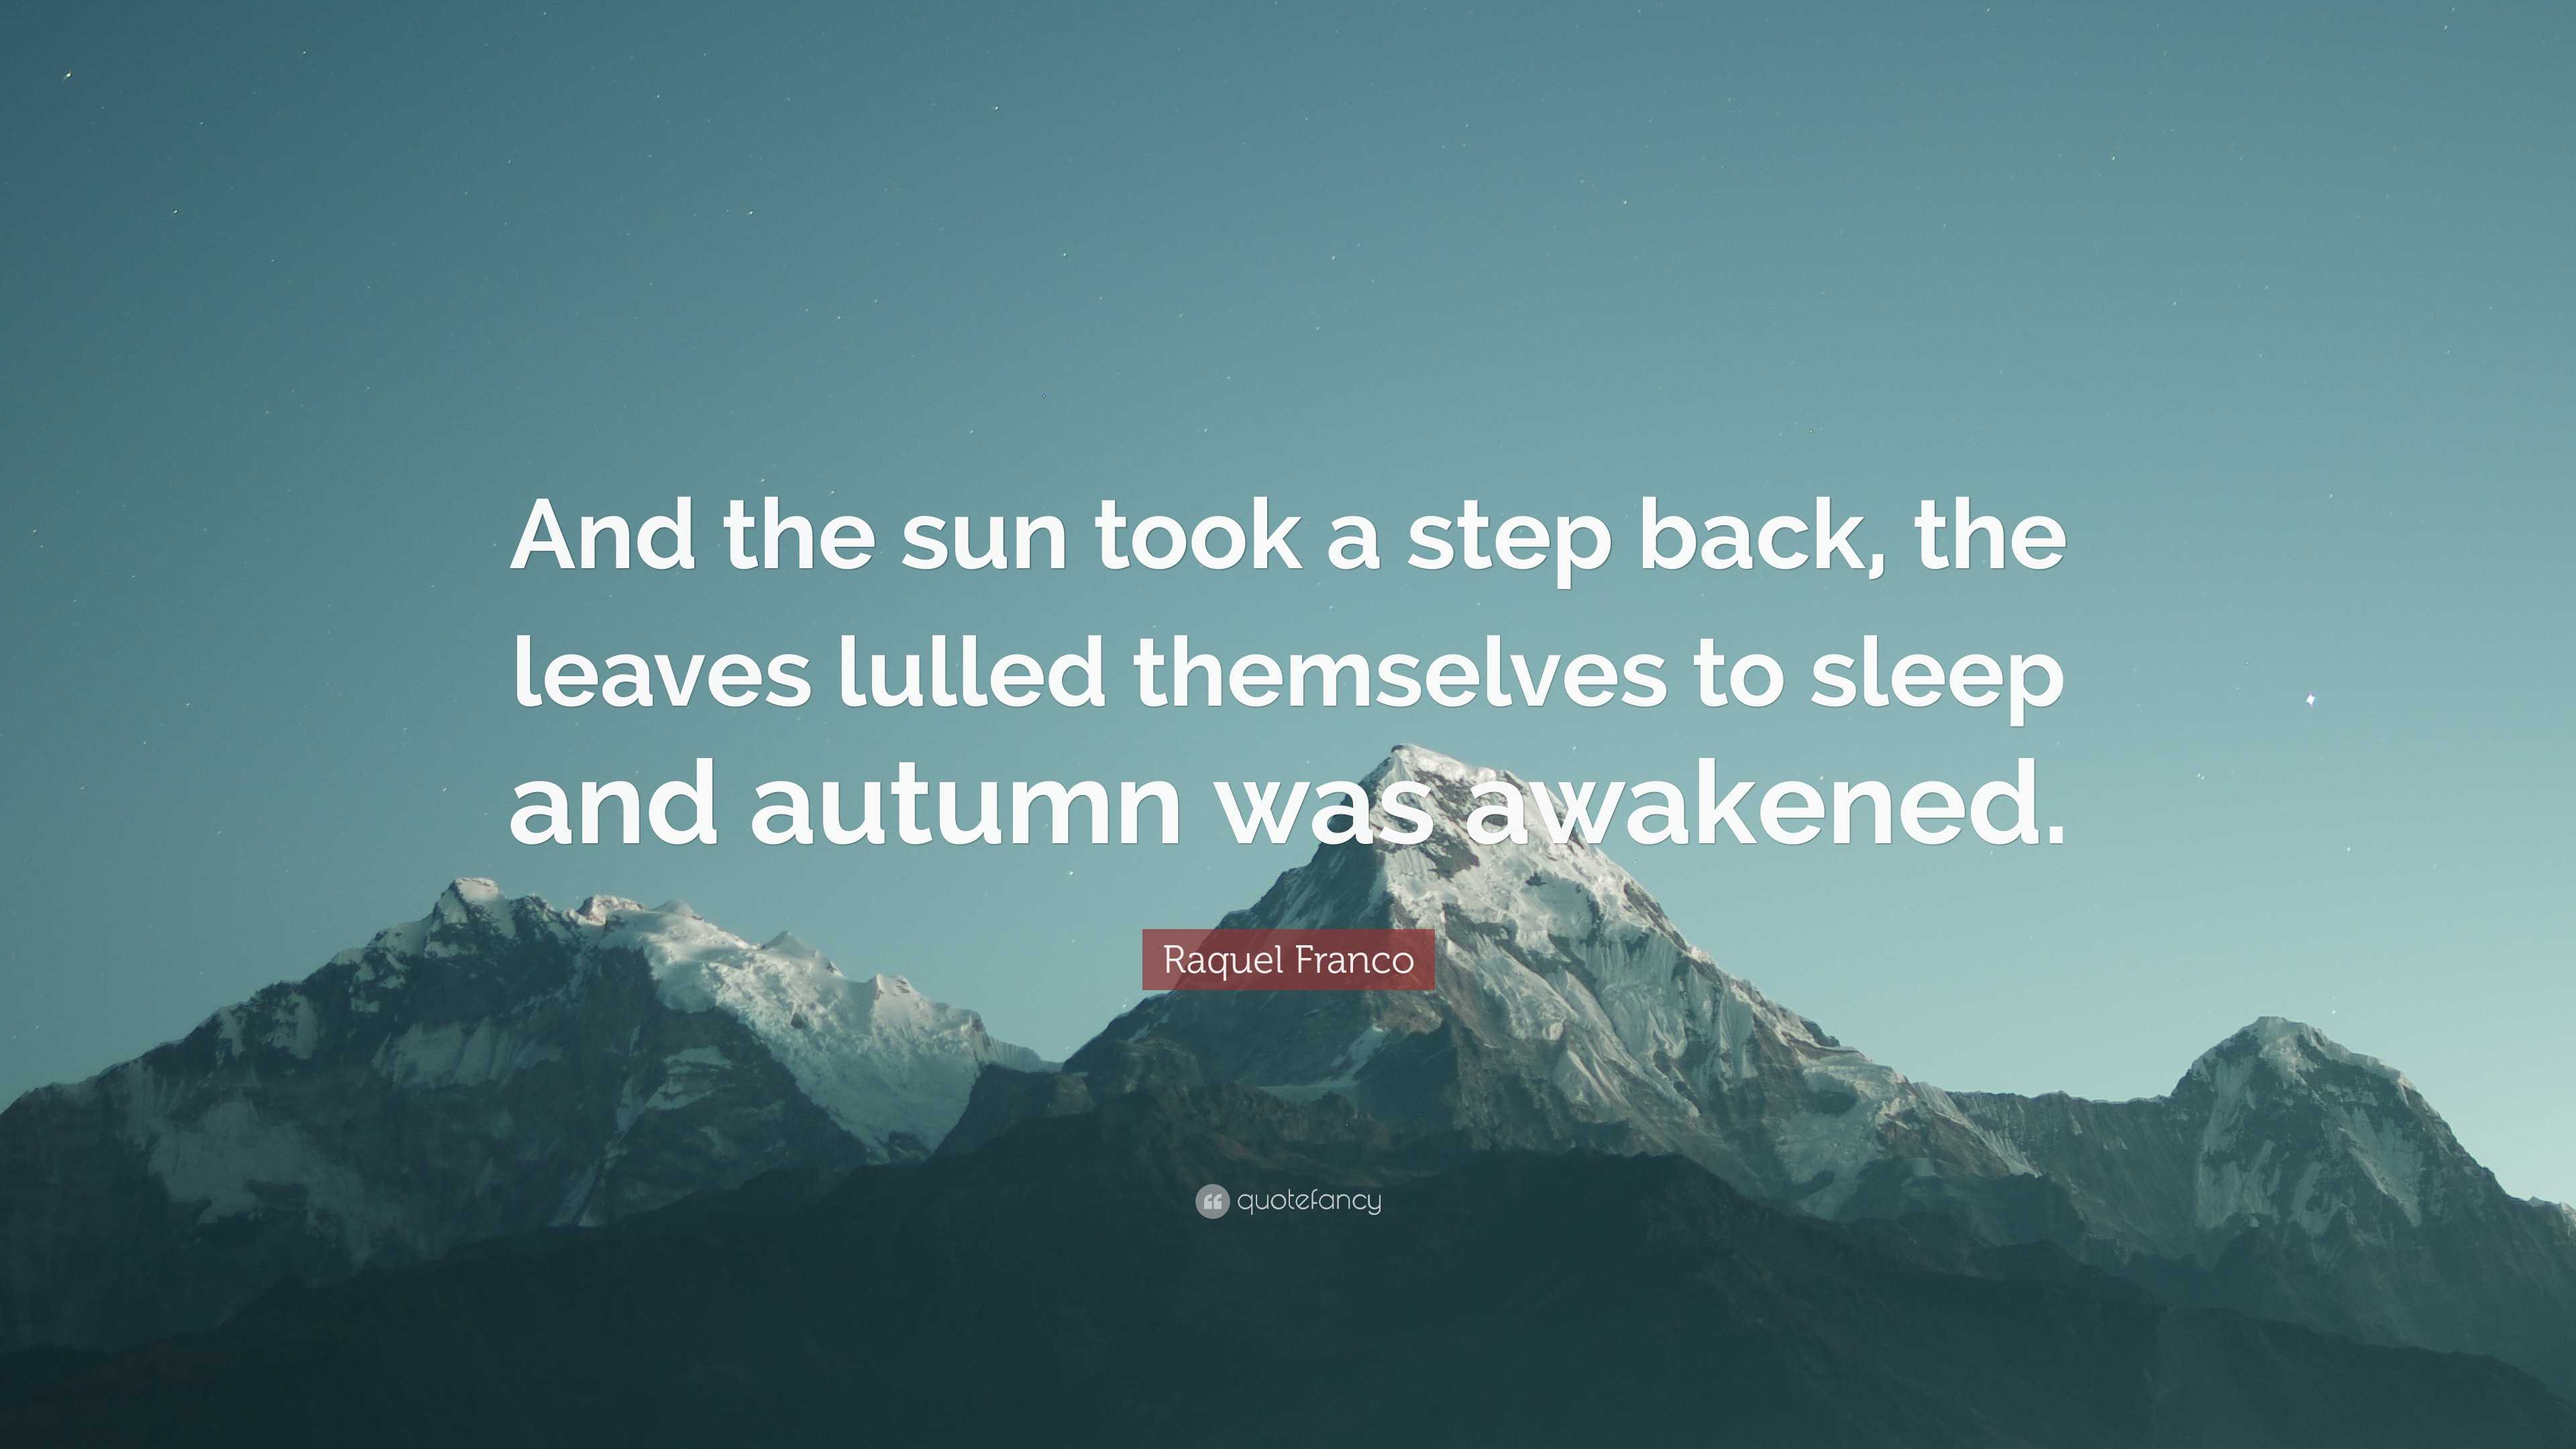 https://quotefancy.com/media/wallpaper/3840x2160/7918097-Raquel-Franco-Quote-And-the-sun-took-a-step-back-the-leaves-lulled.jpg